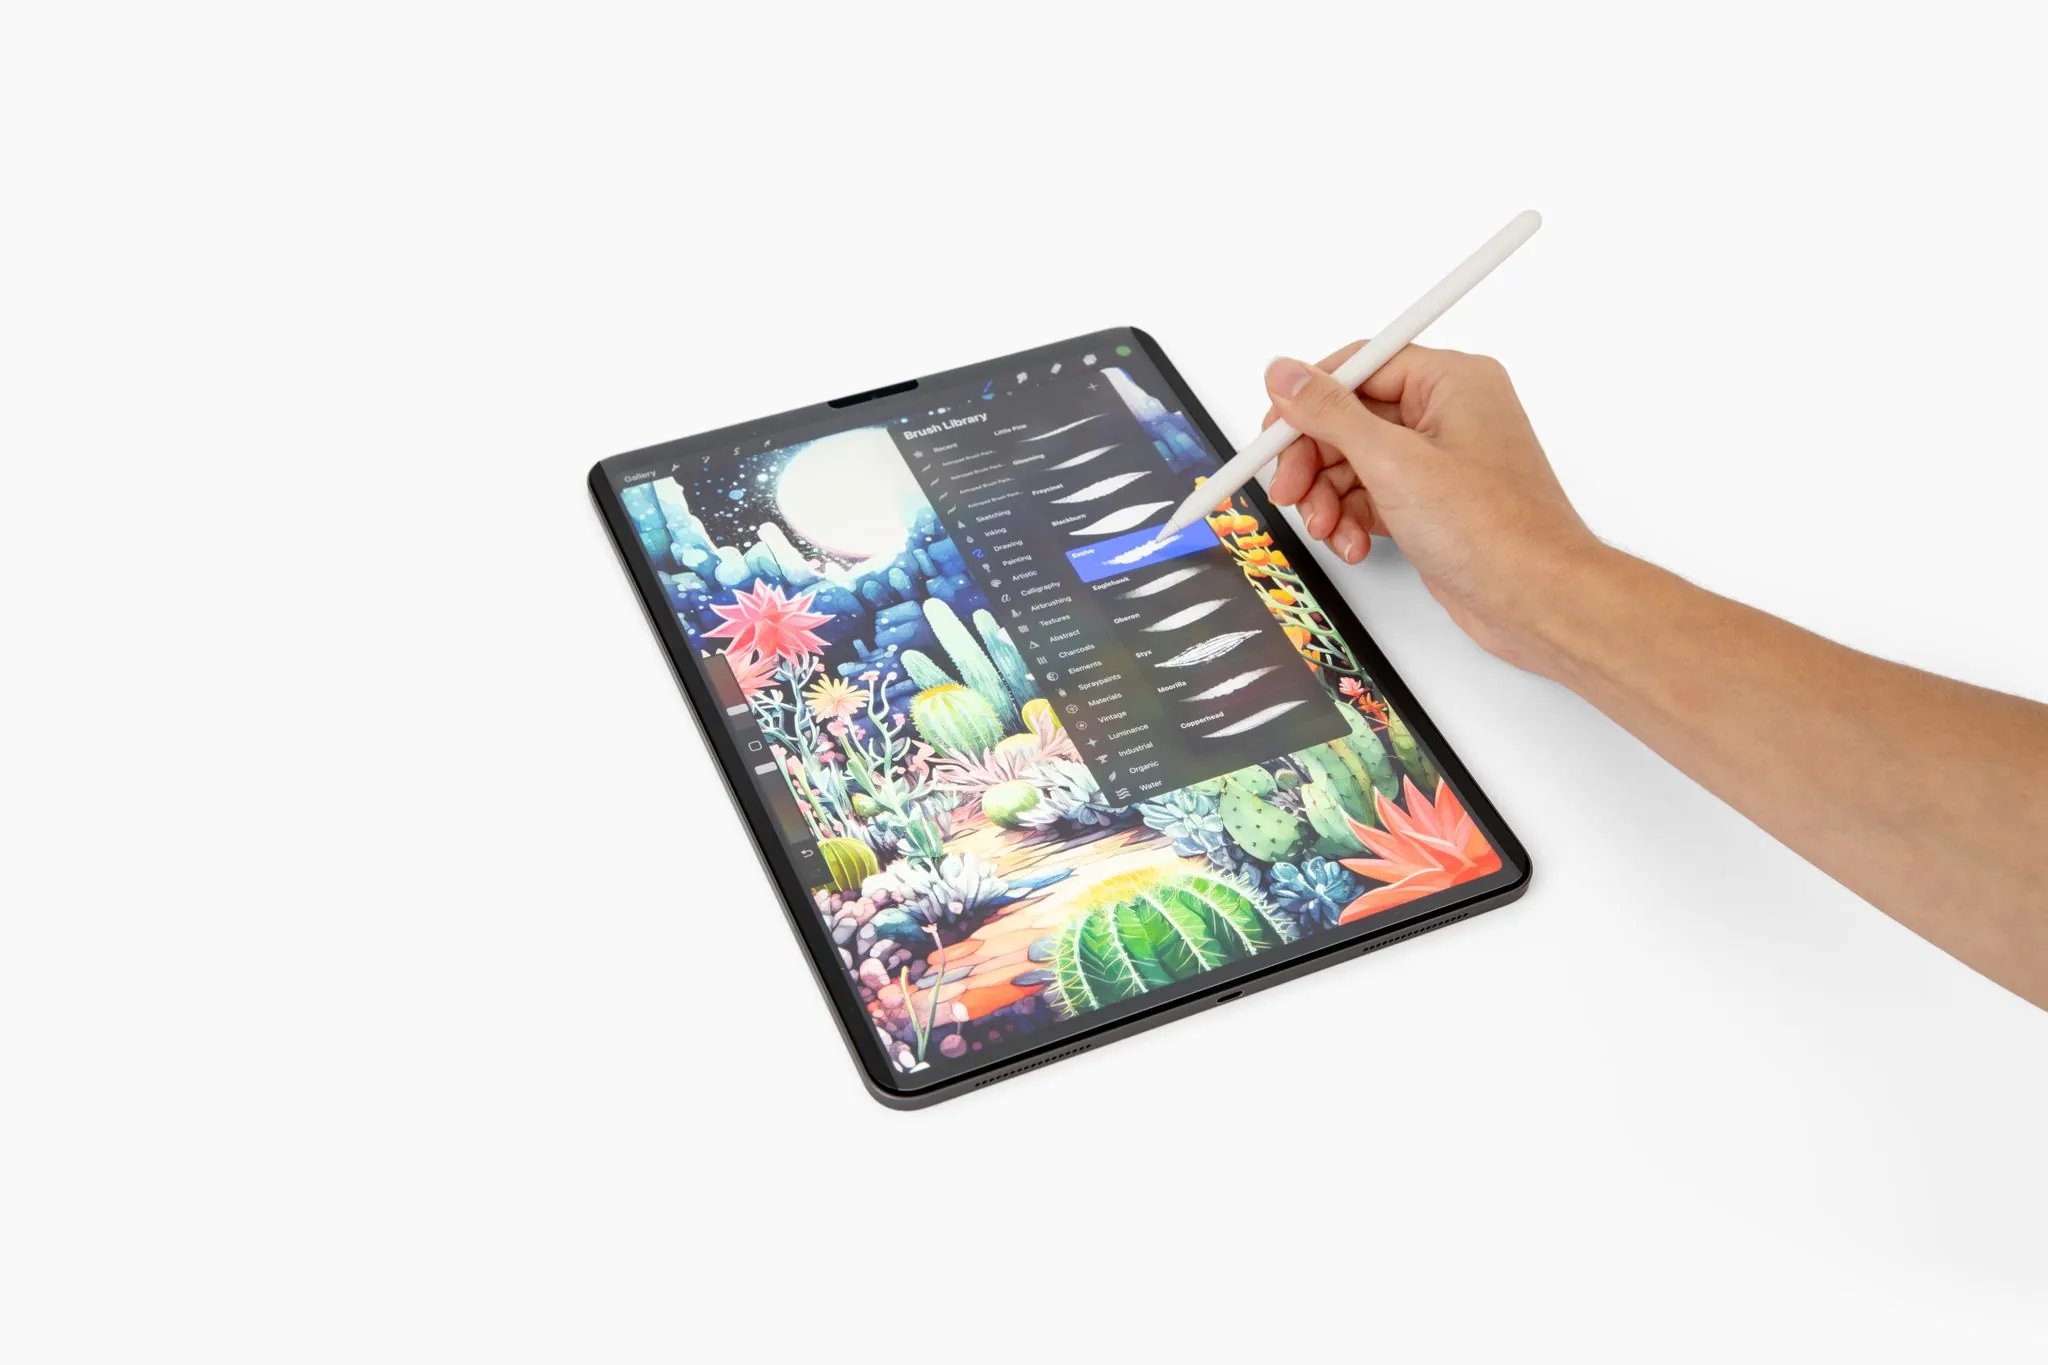 Installing Rock Paper Pencil! Magnetic paperfeel screen protector + ba, Drawing On IPad